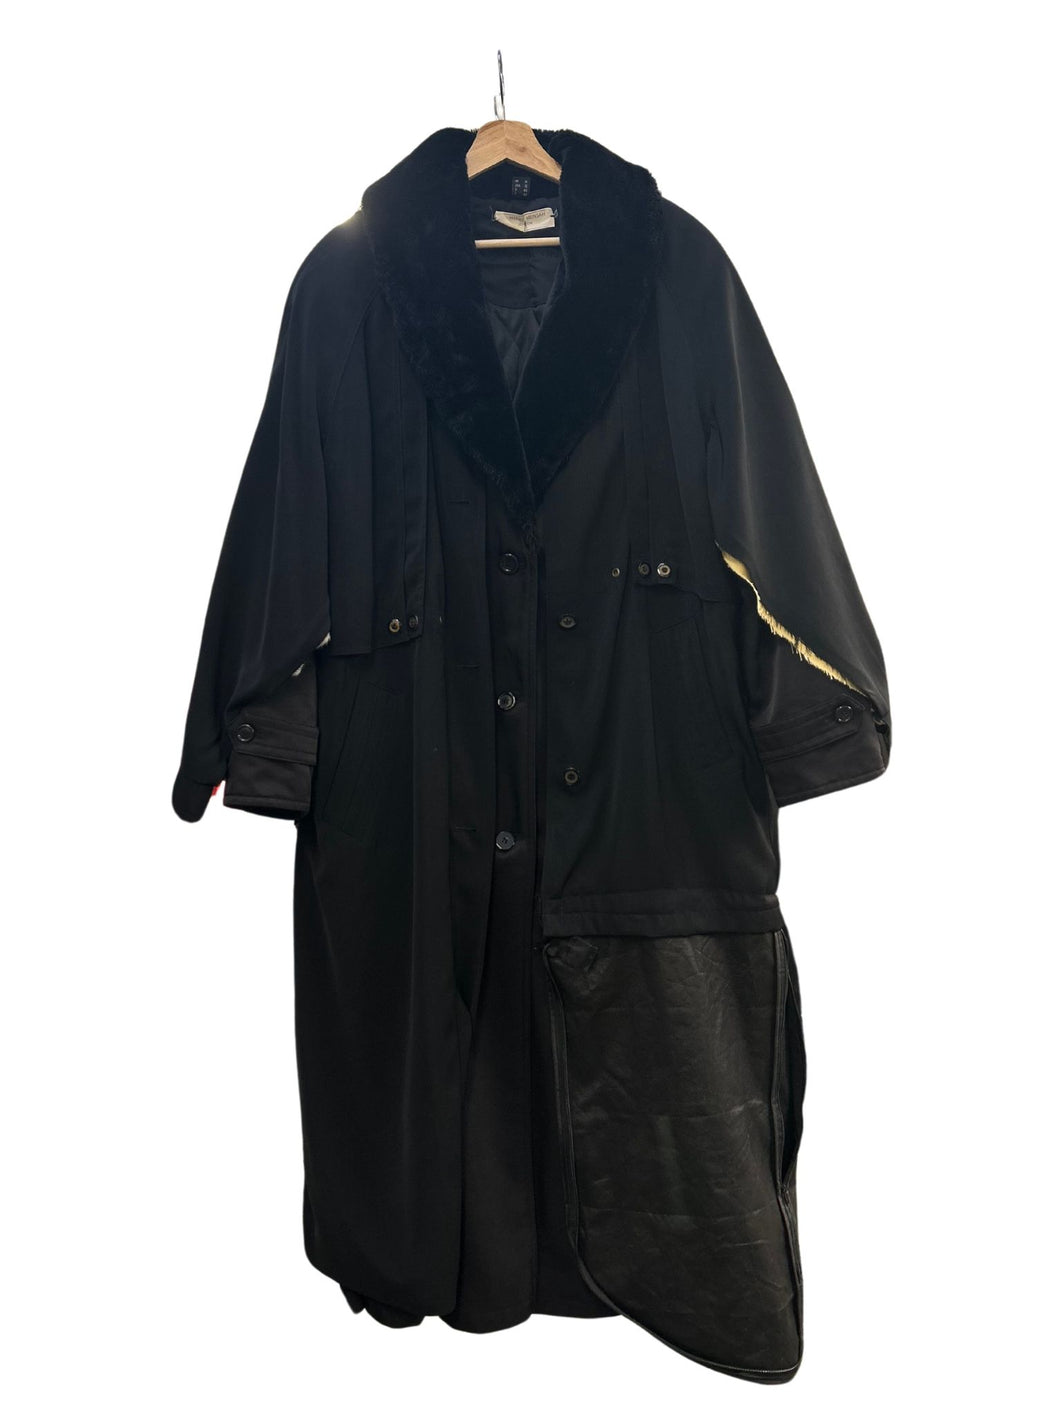 Deconstructed Double Coat with Pocket Detail